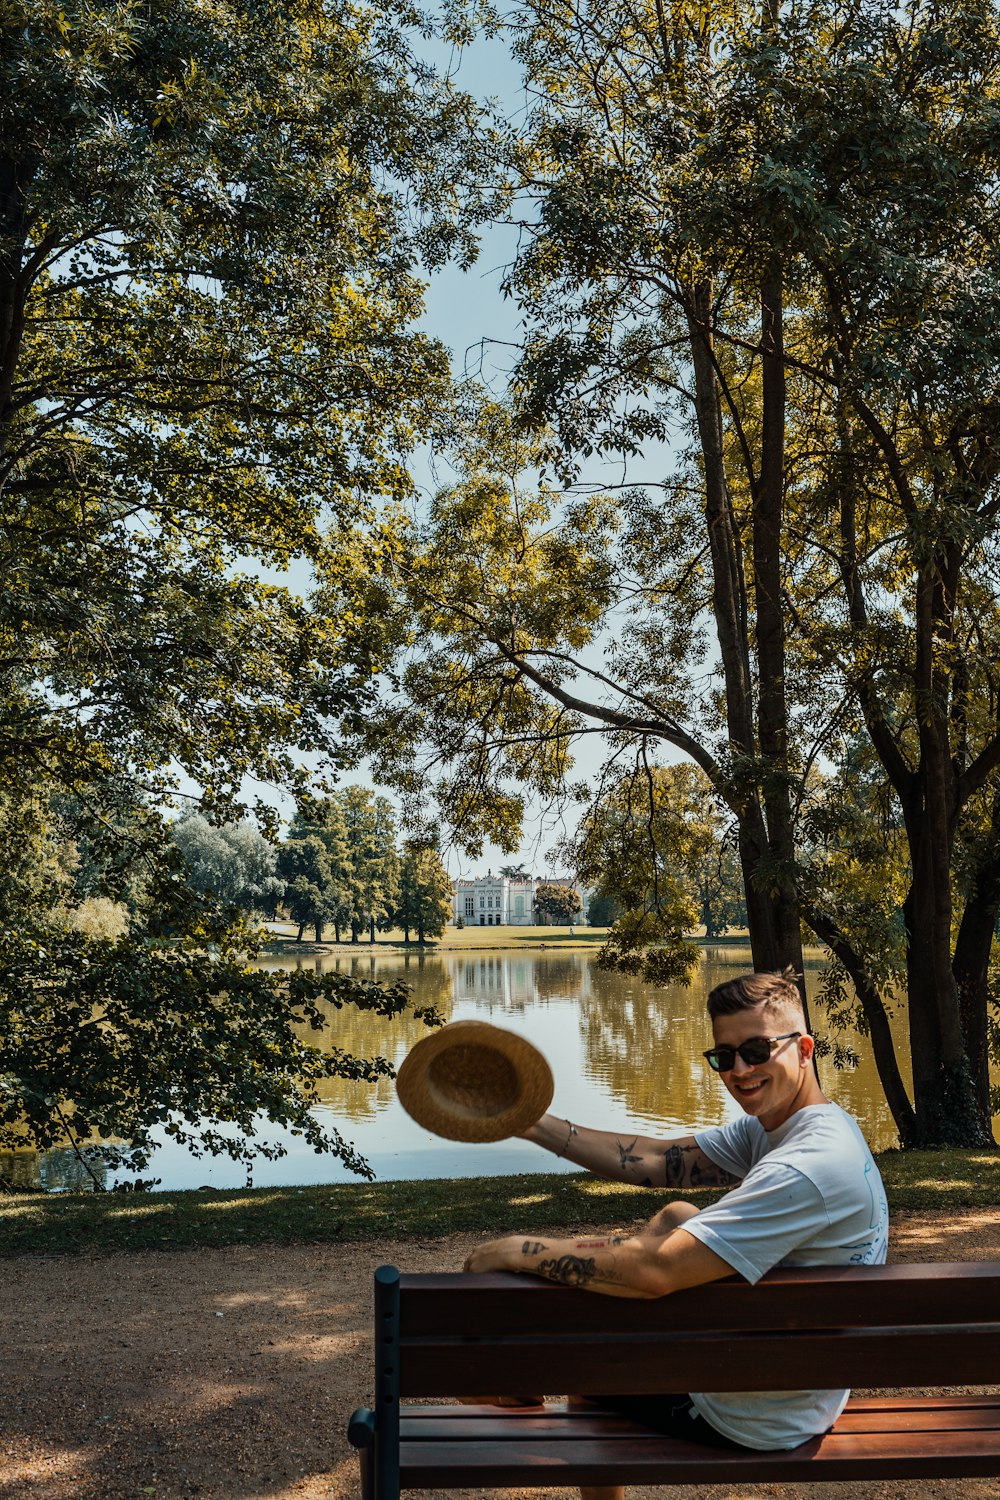 a man sitting on a bench with a frisbee in his hand